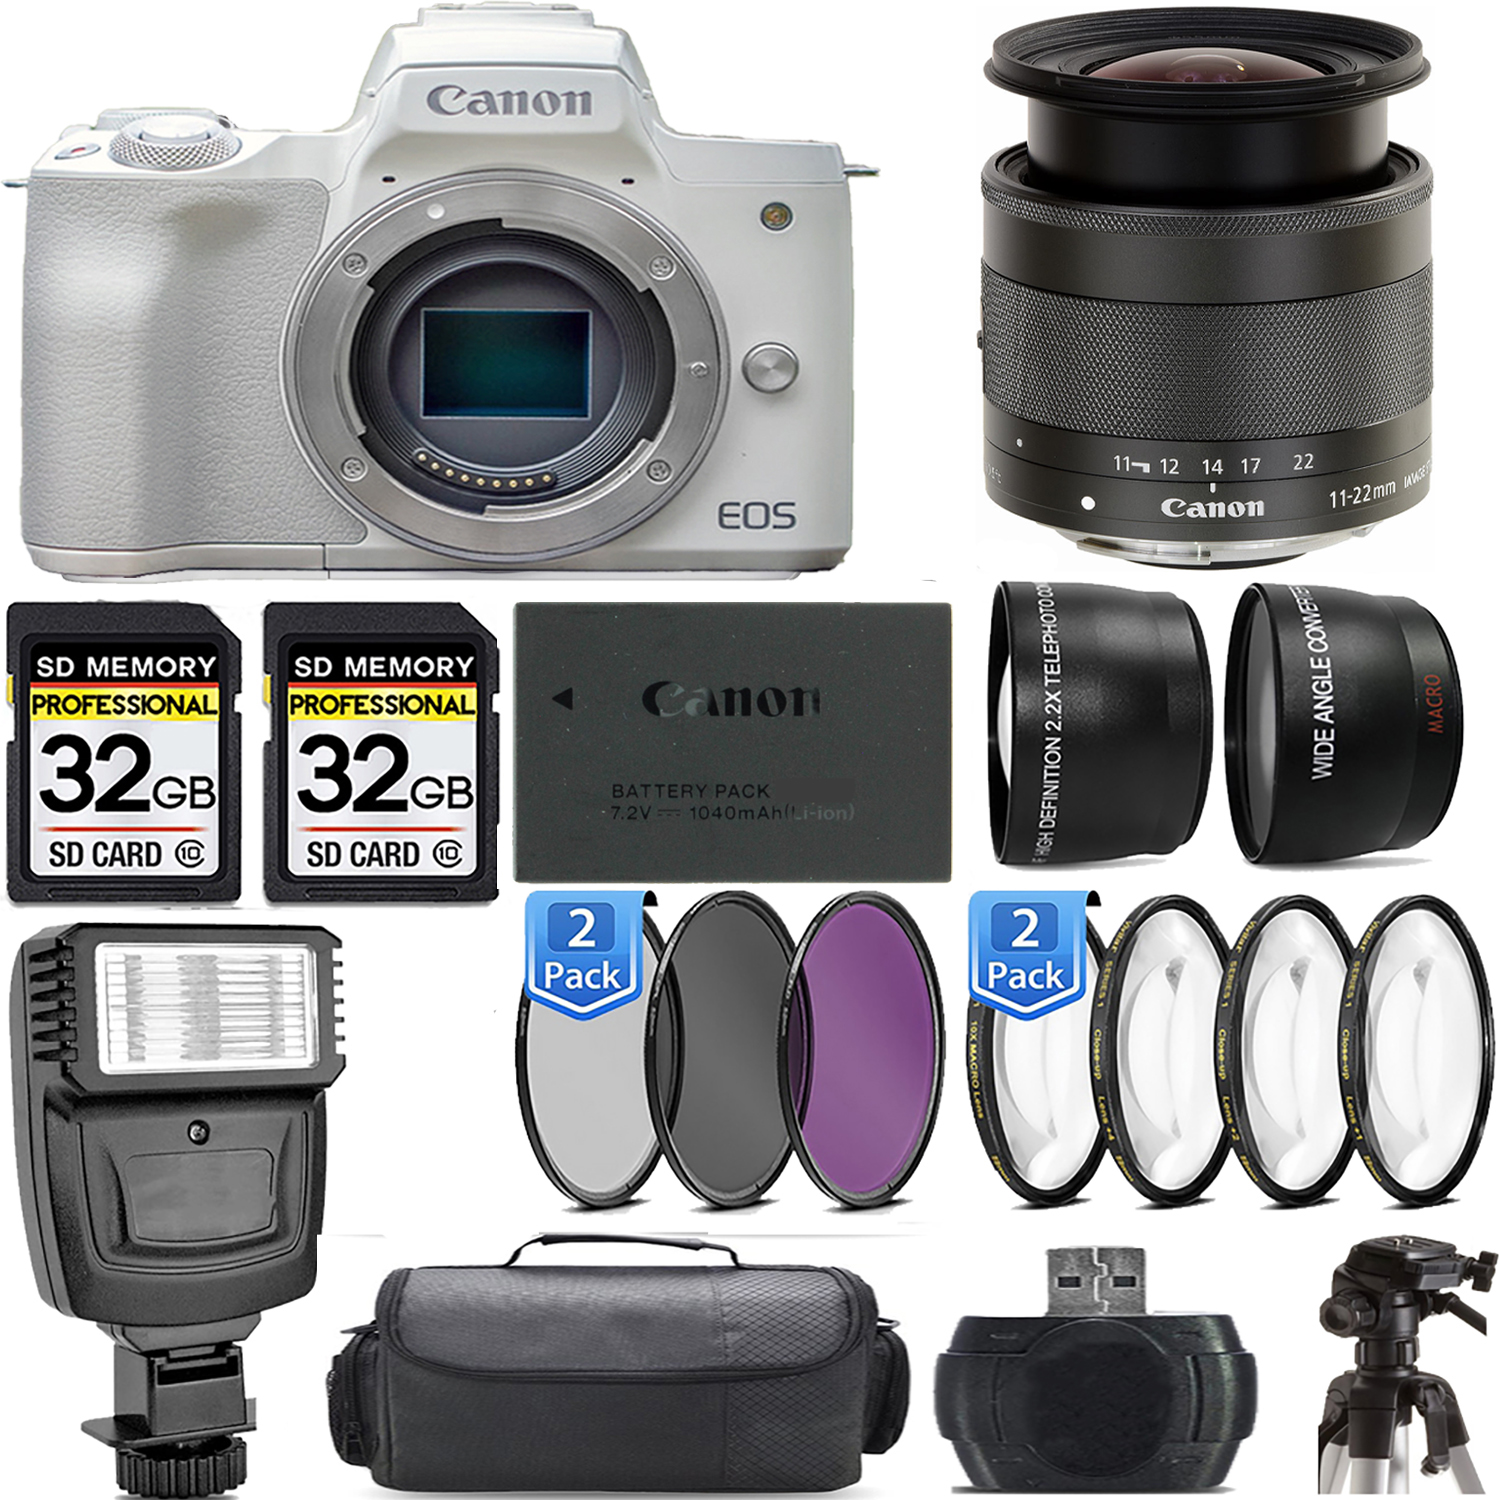 EOS M50 Mark II Camera (White) + 11-22mm f/4-5.6 IS STM Lens + Flash - Kit *FREE SHIPPING*